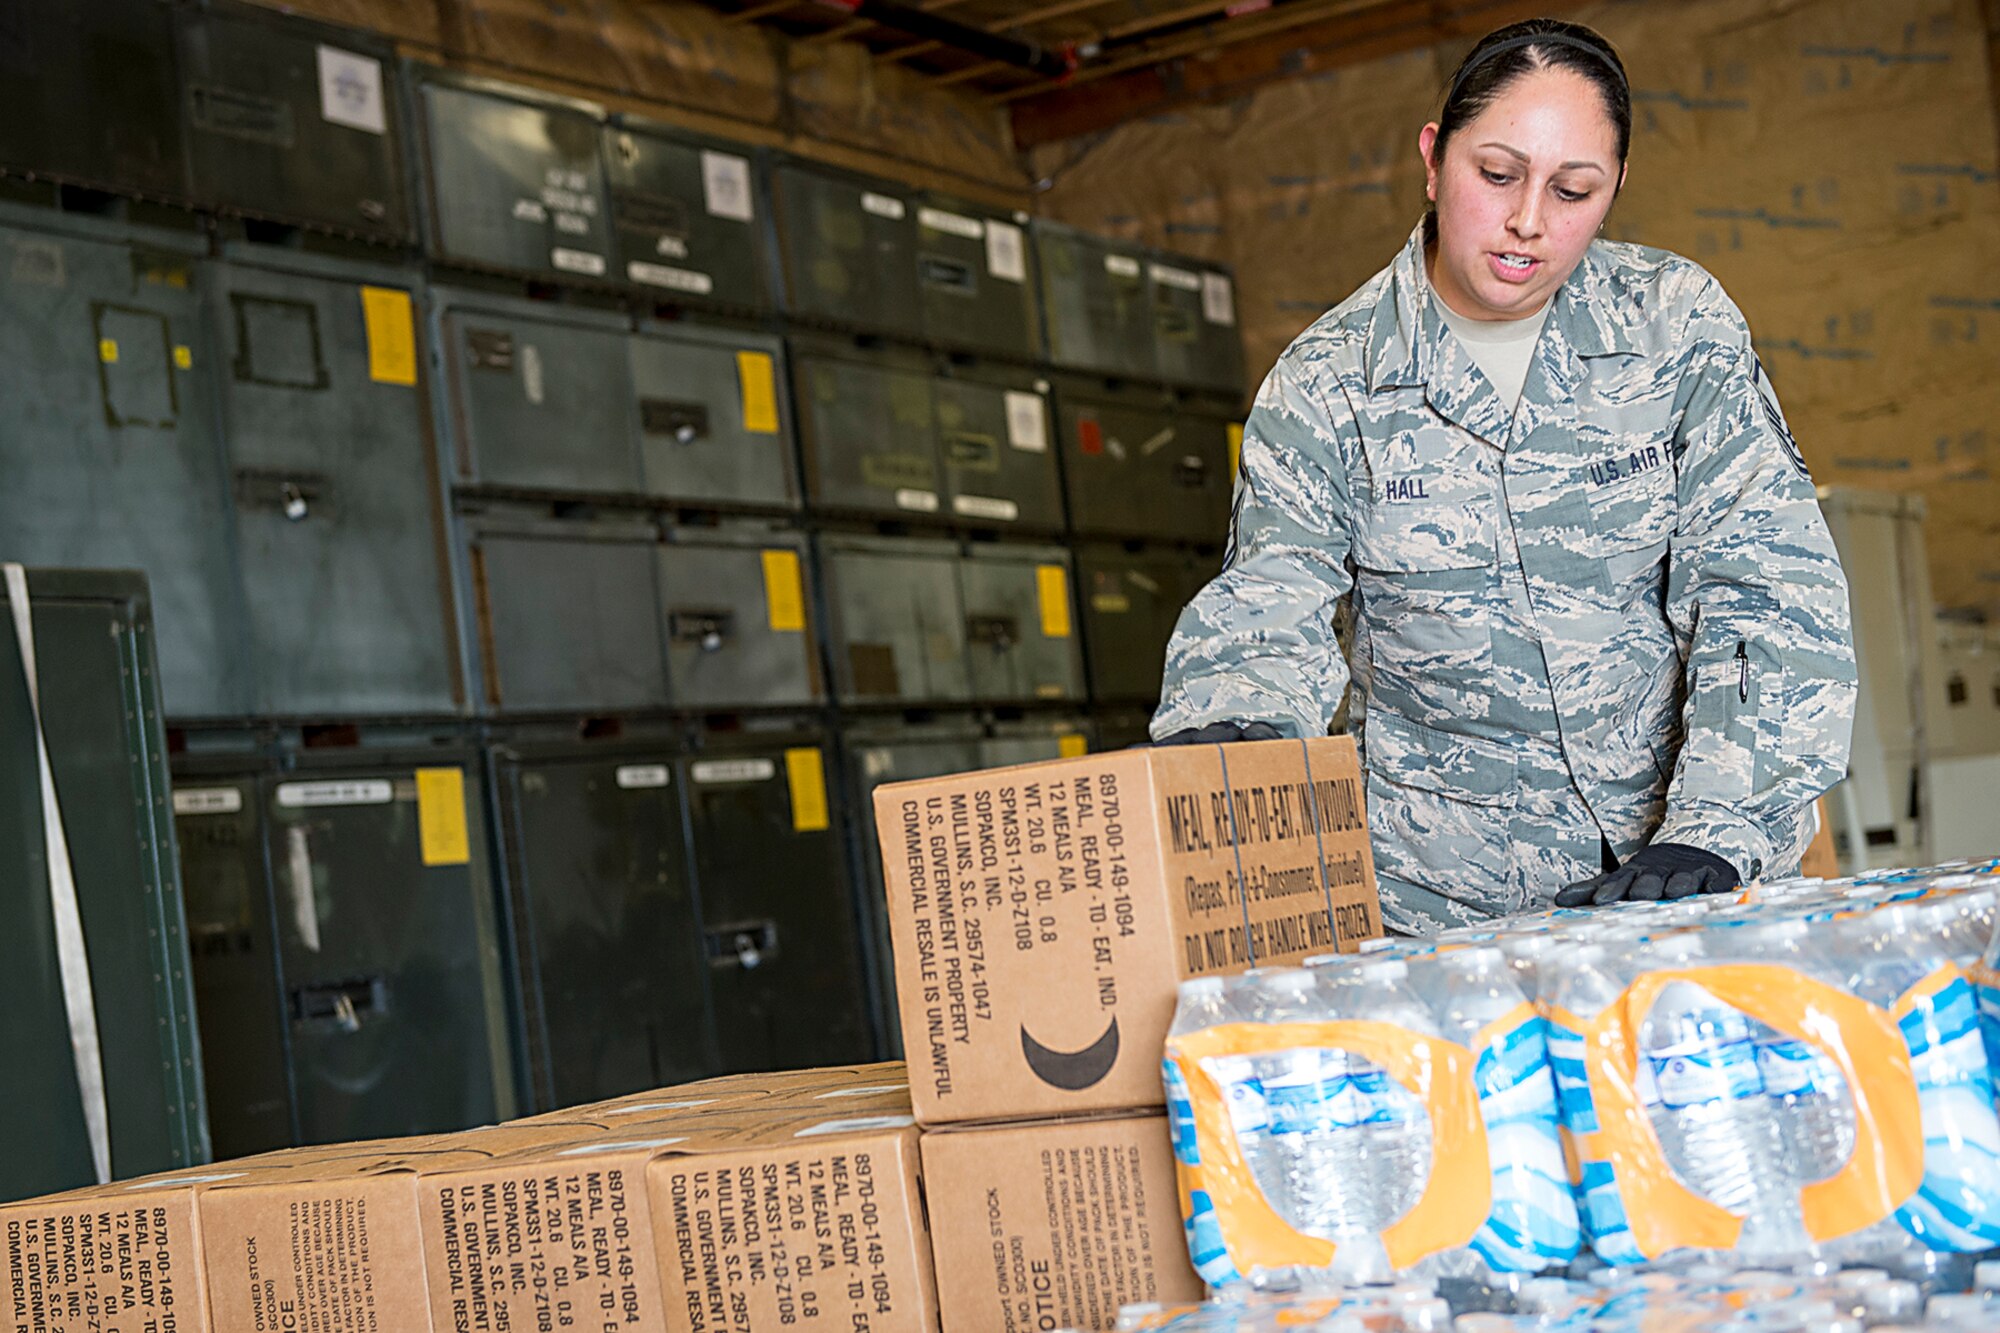 Master Sgt. Angie Hall, 434th Logistics Readiness Squadron combat readiness technician, palletizes water and meals ready to eat at Grissom Air Reserve Base, Ind., Sept. 11, 2017. The cargo is being prepared for shipment to Florida as part of Hurricane Irma relief efforts. (U.S. Air Force photo/Douglas Hays)